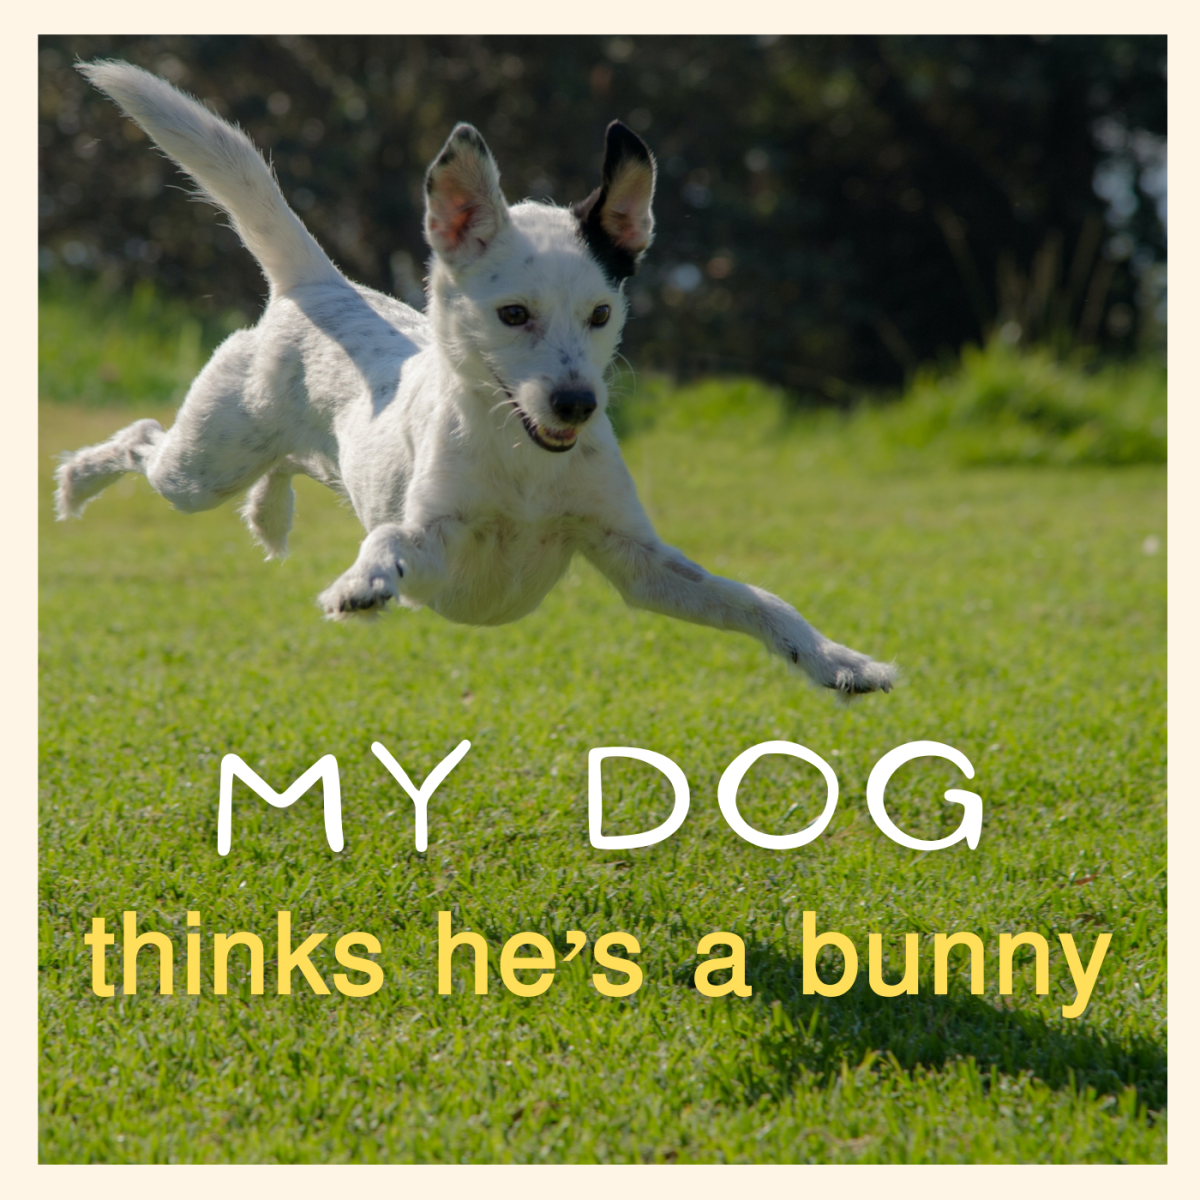 5 Causes of Bunny Hopping in Dogs